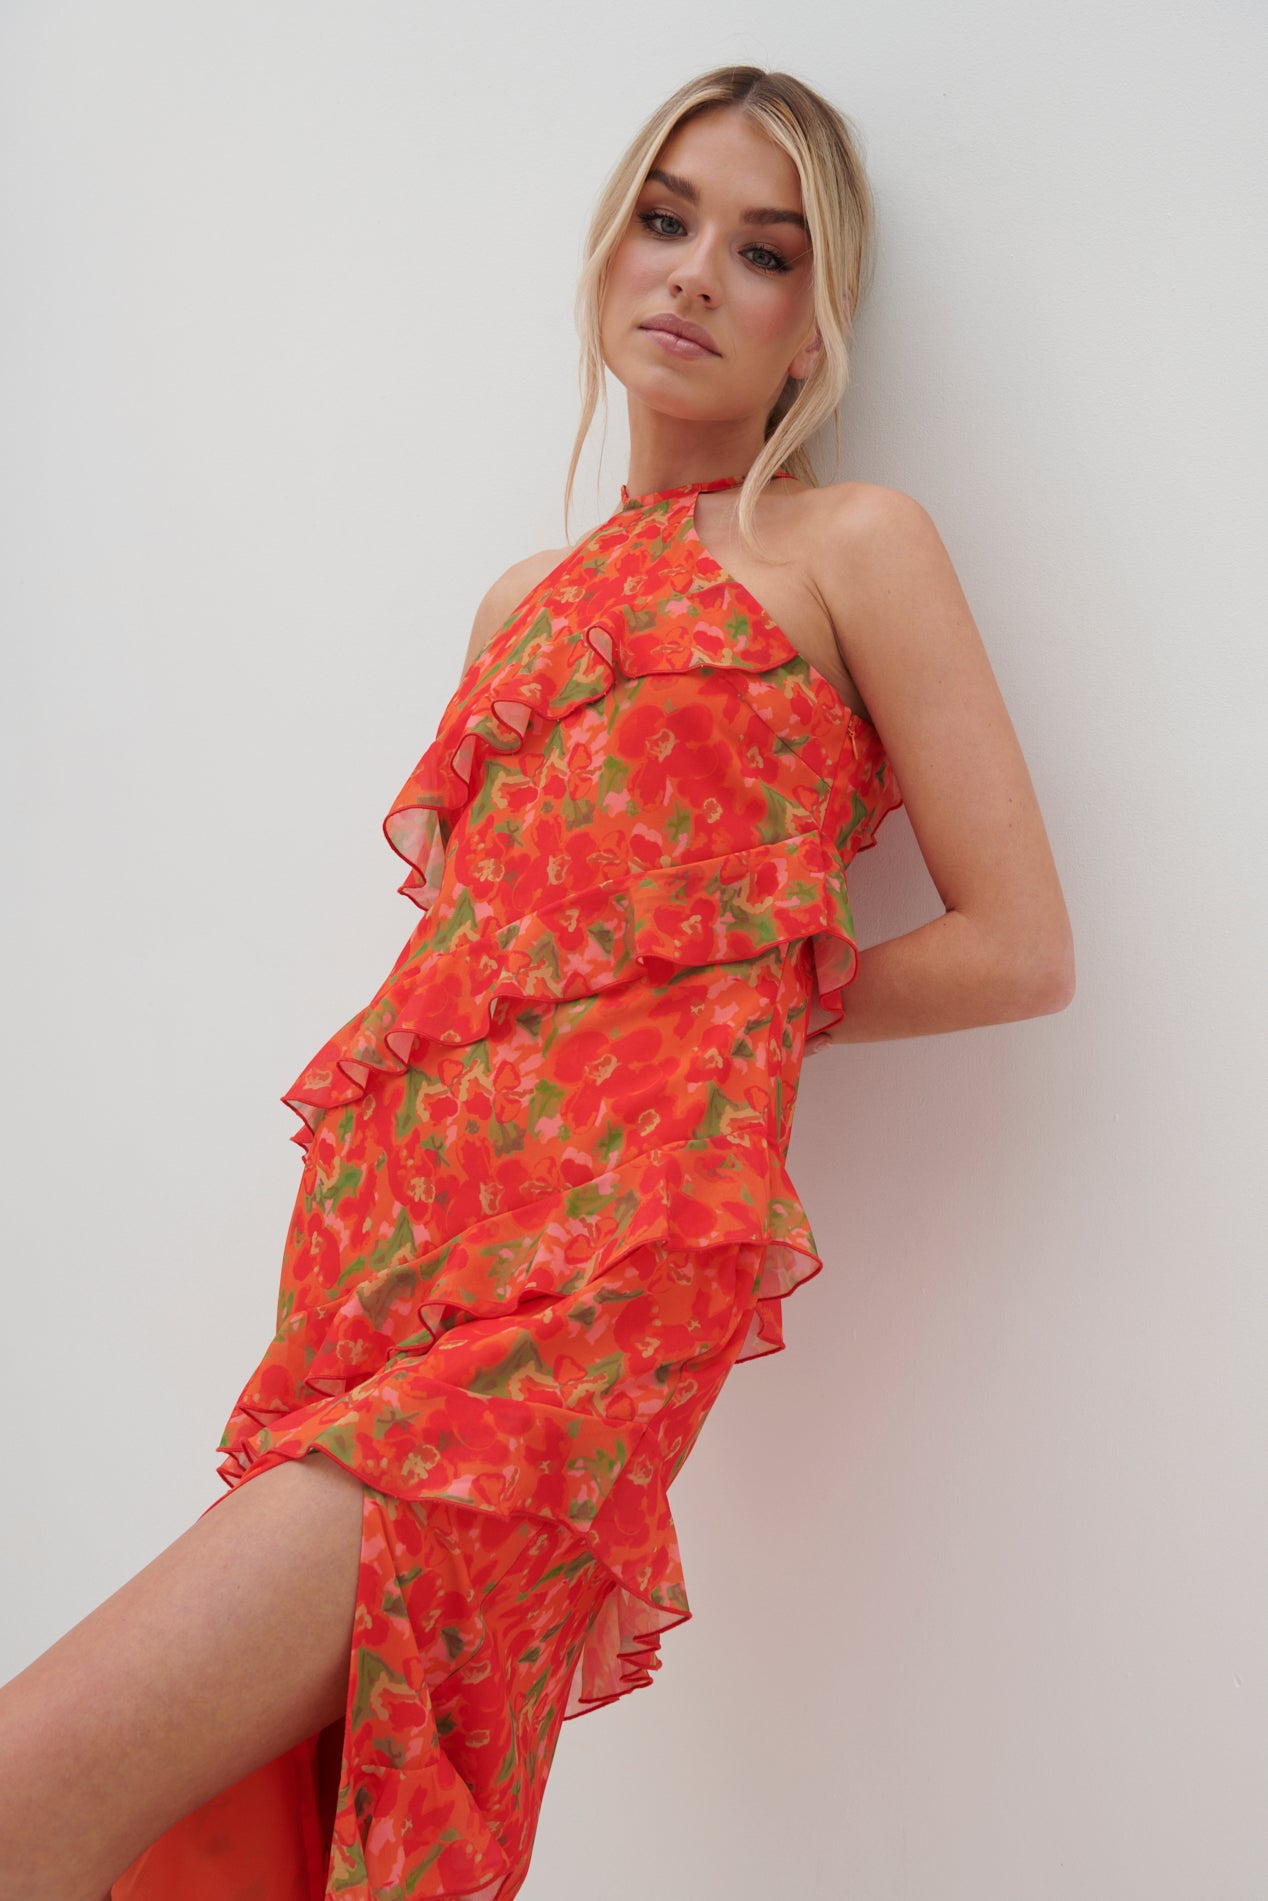 Katy Ruffle Midaxi Dress - Red and Orange Floral